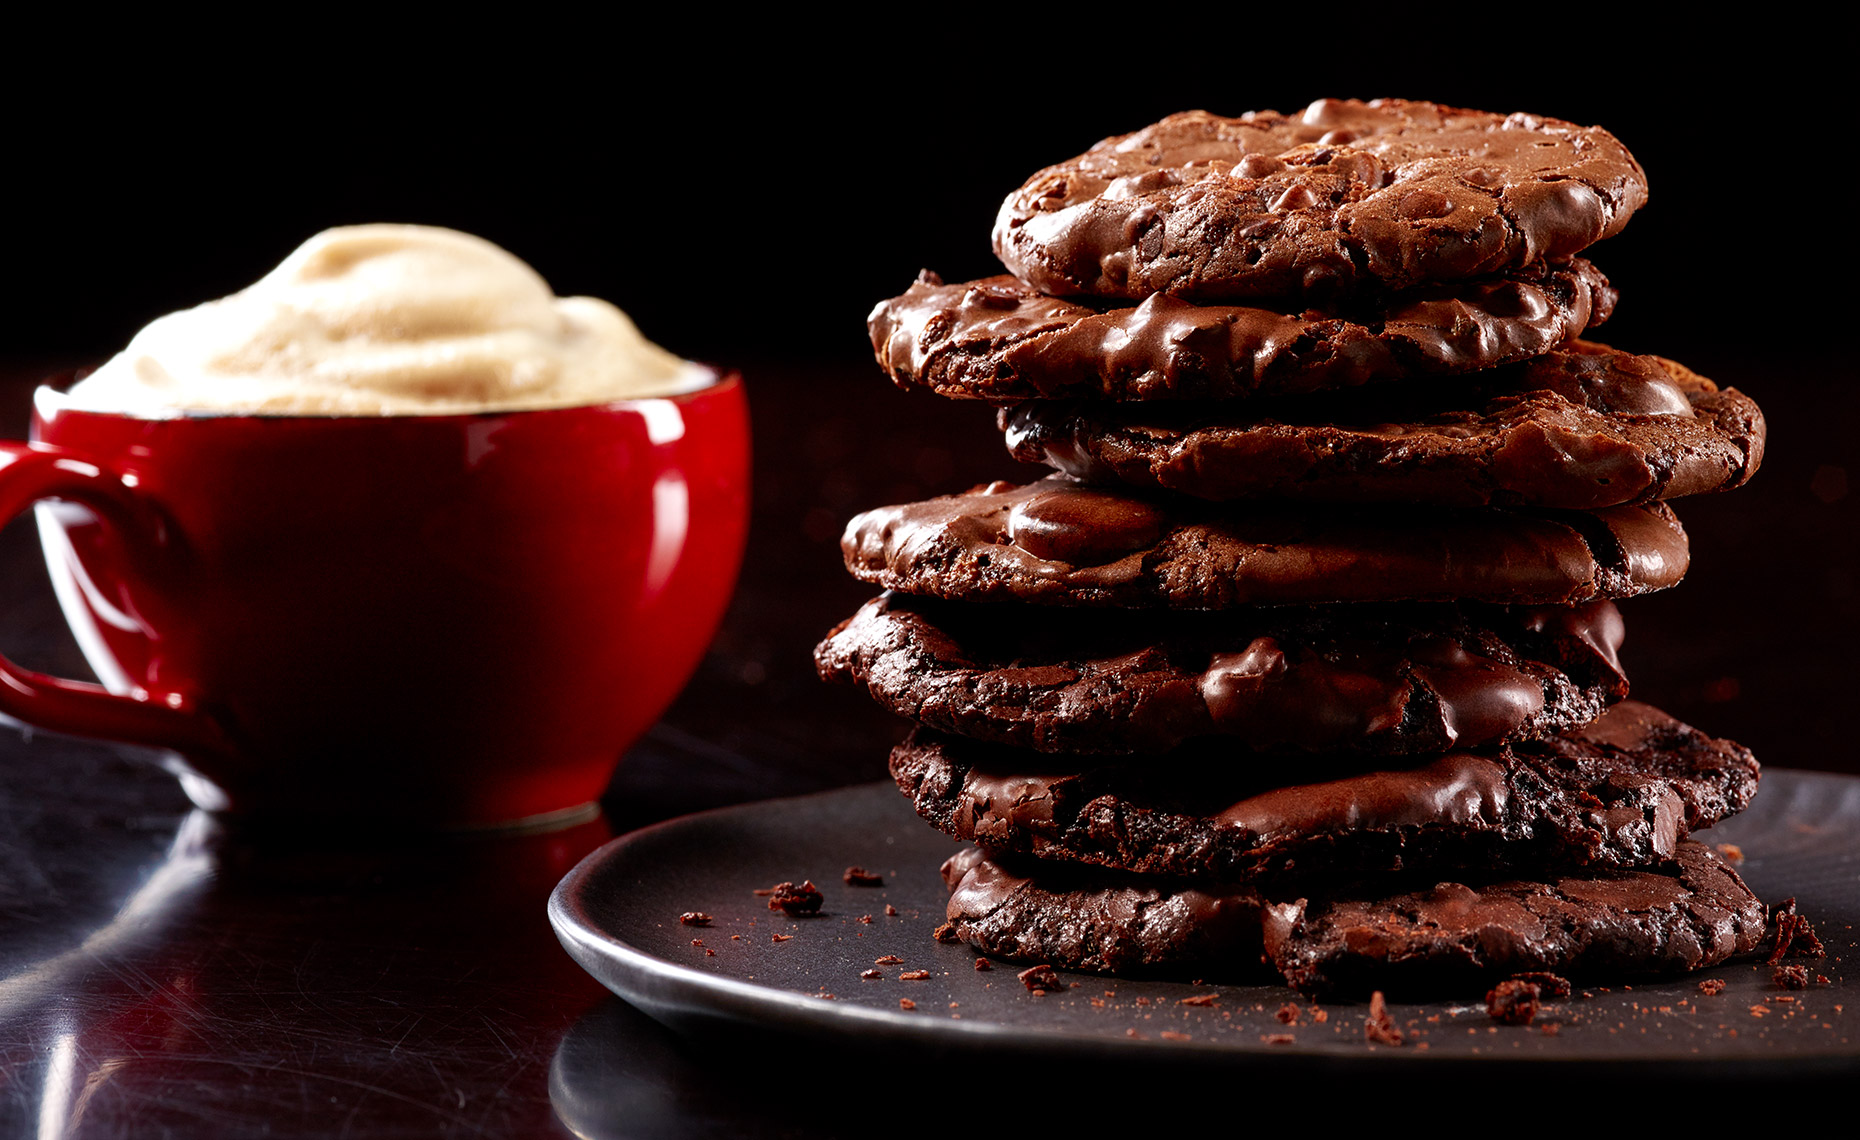 Stack of chocolate chocolate cookies and cup of espresso